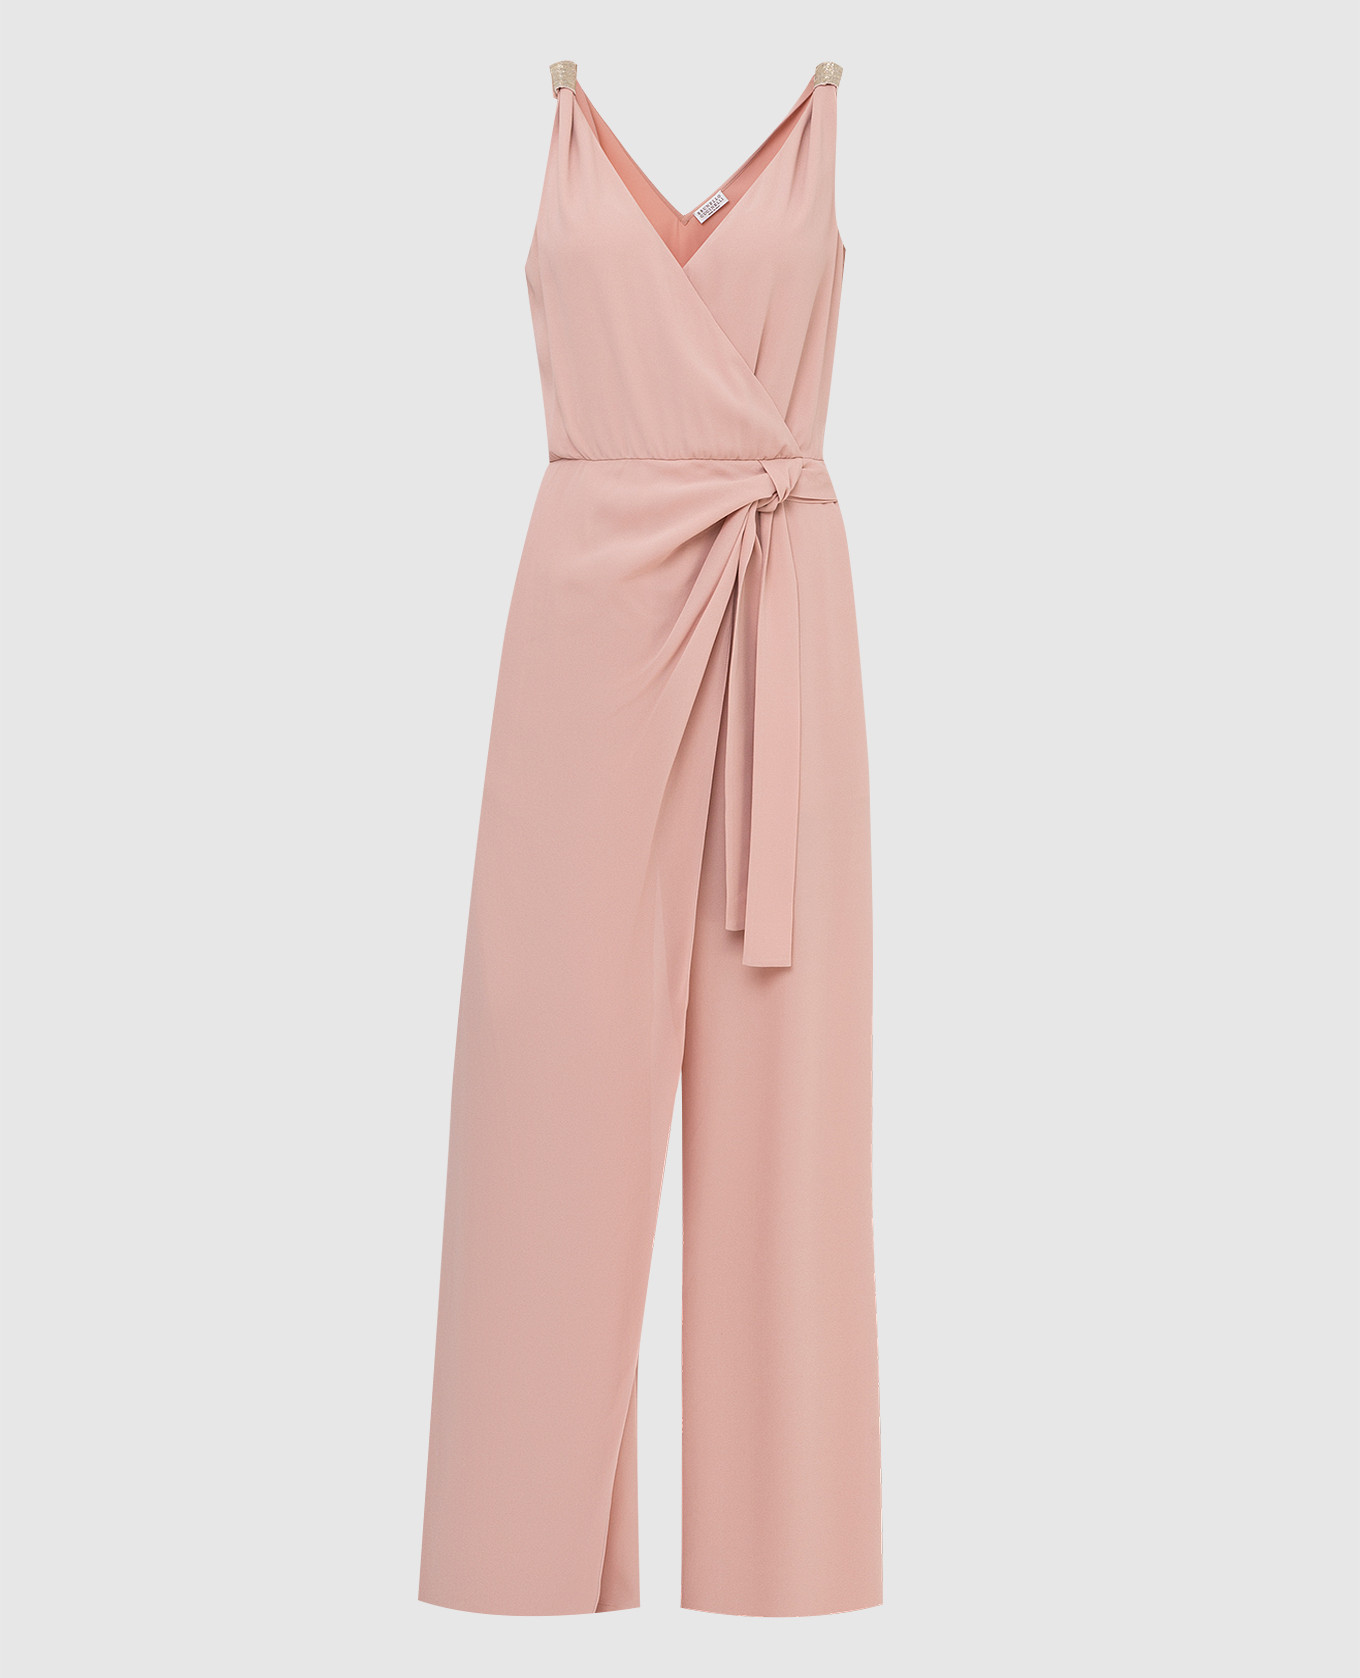 Powdery silk jumpsuit with slit and chains